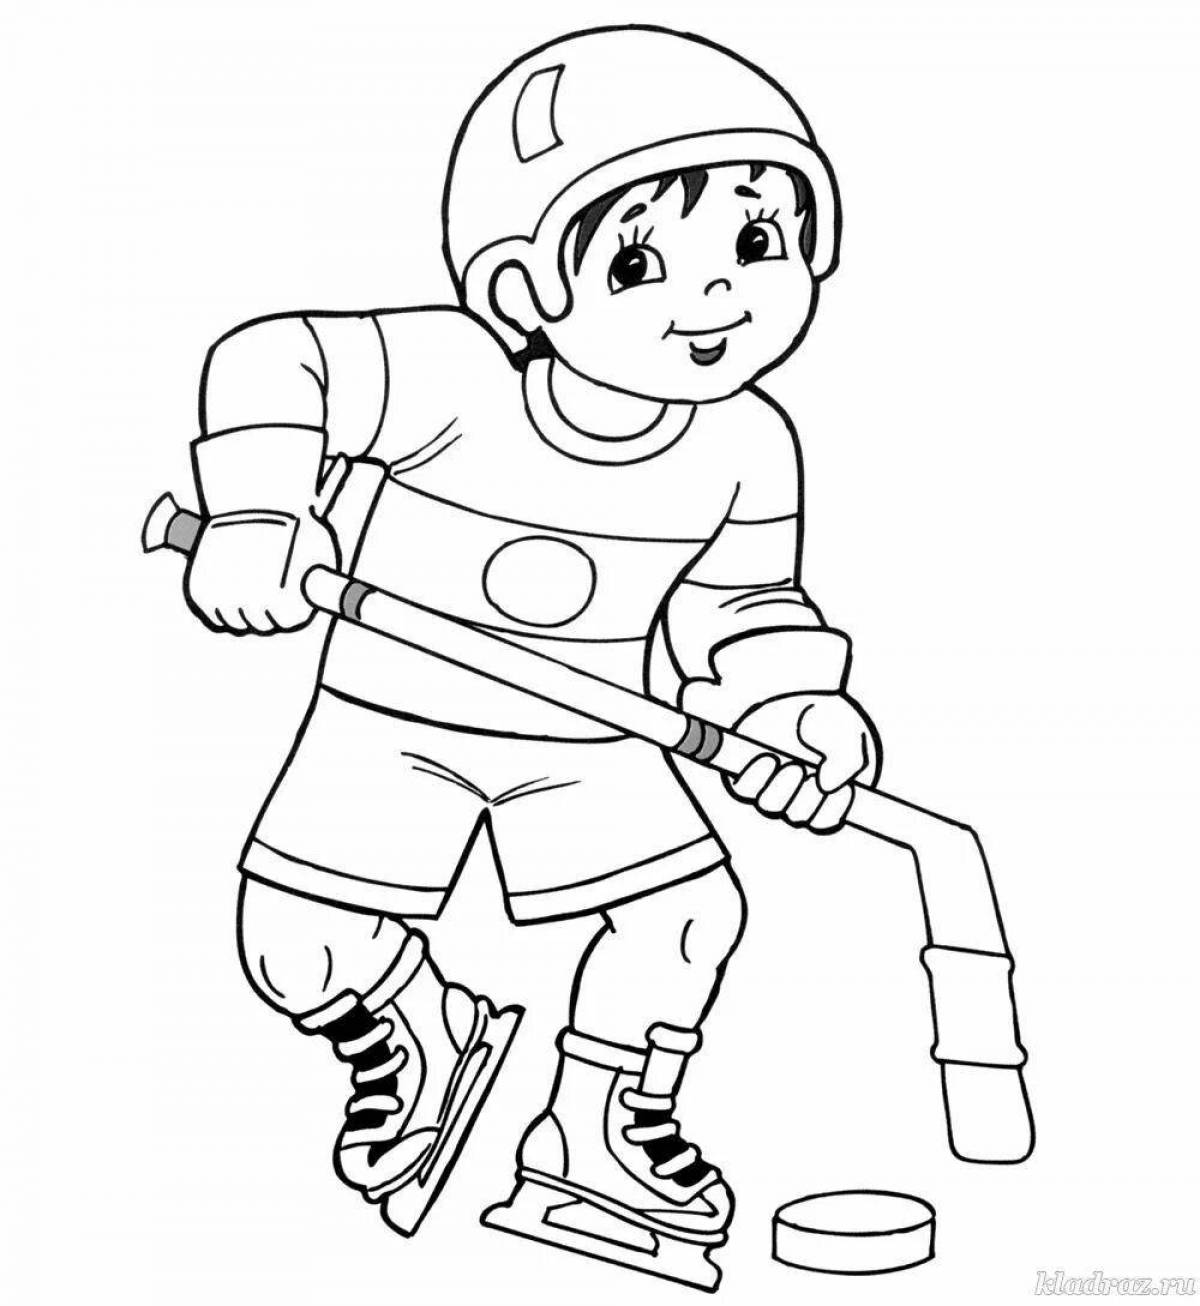 Grand luge coloring book